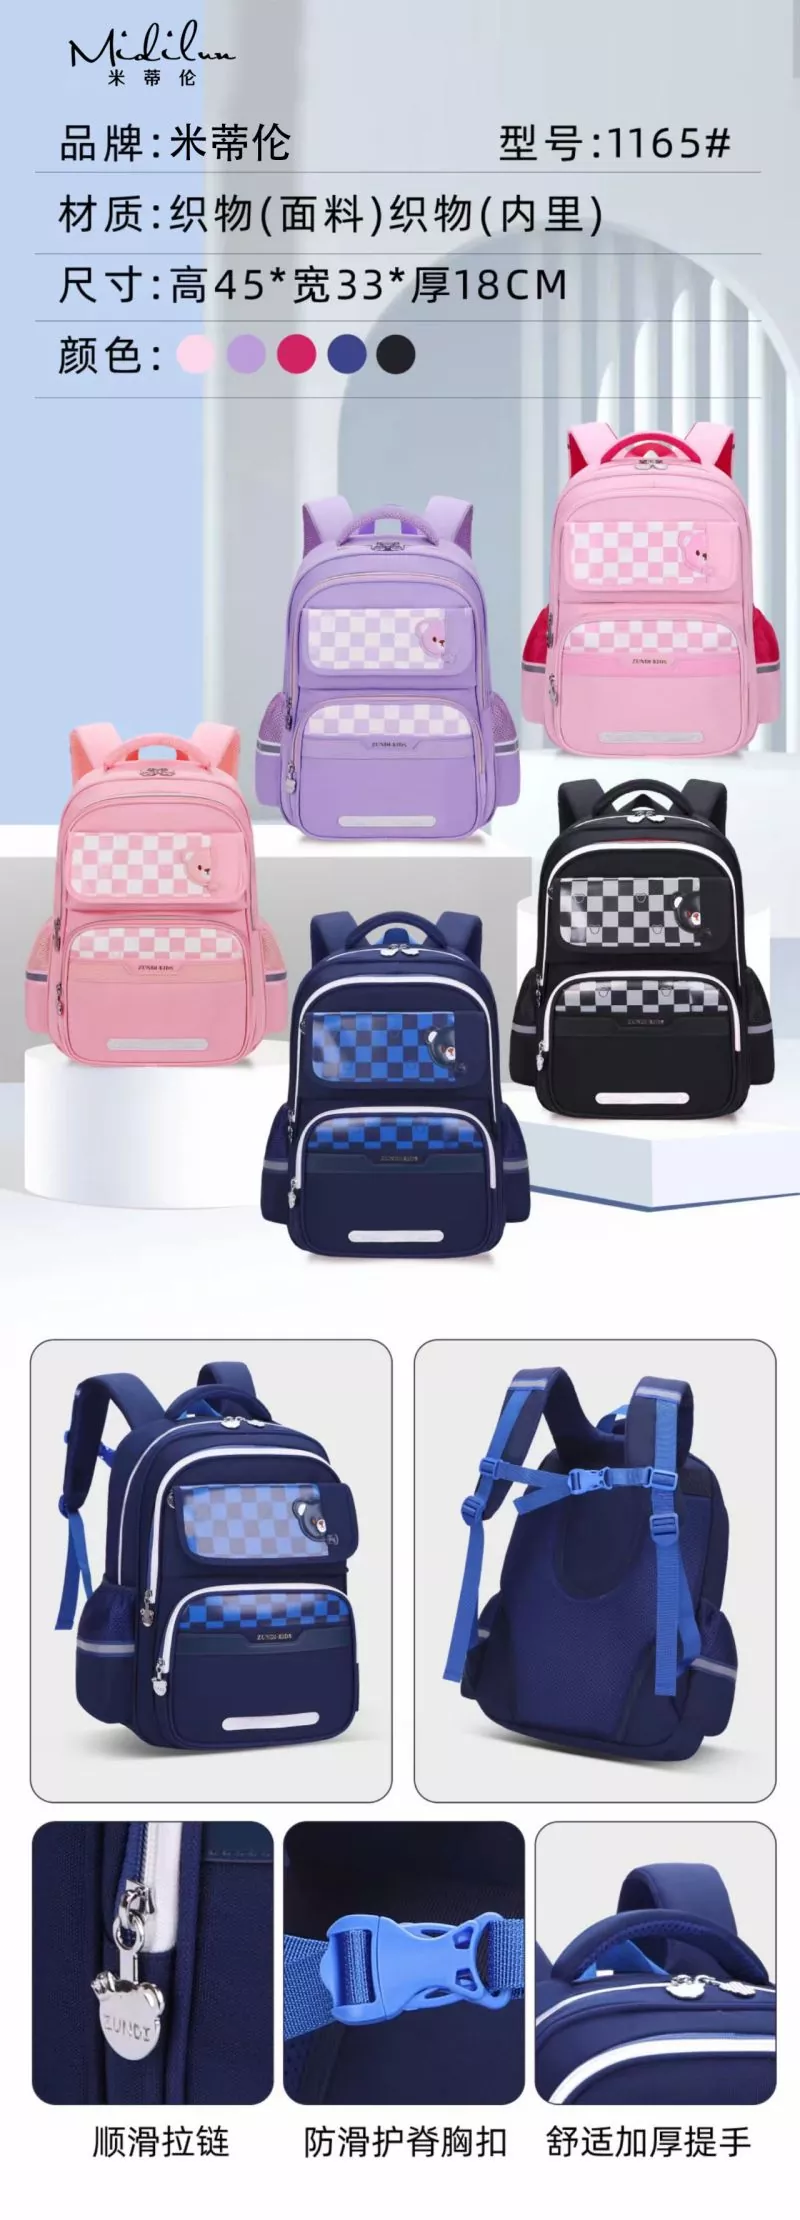 Practical Backpacks for Students